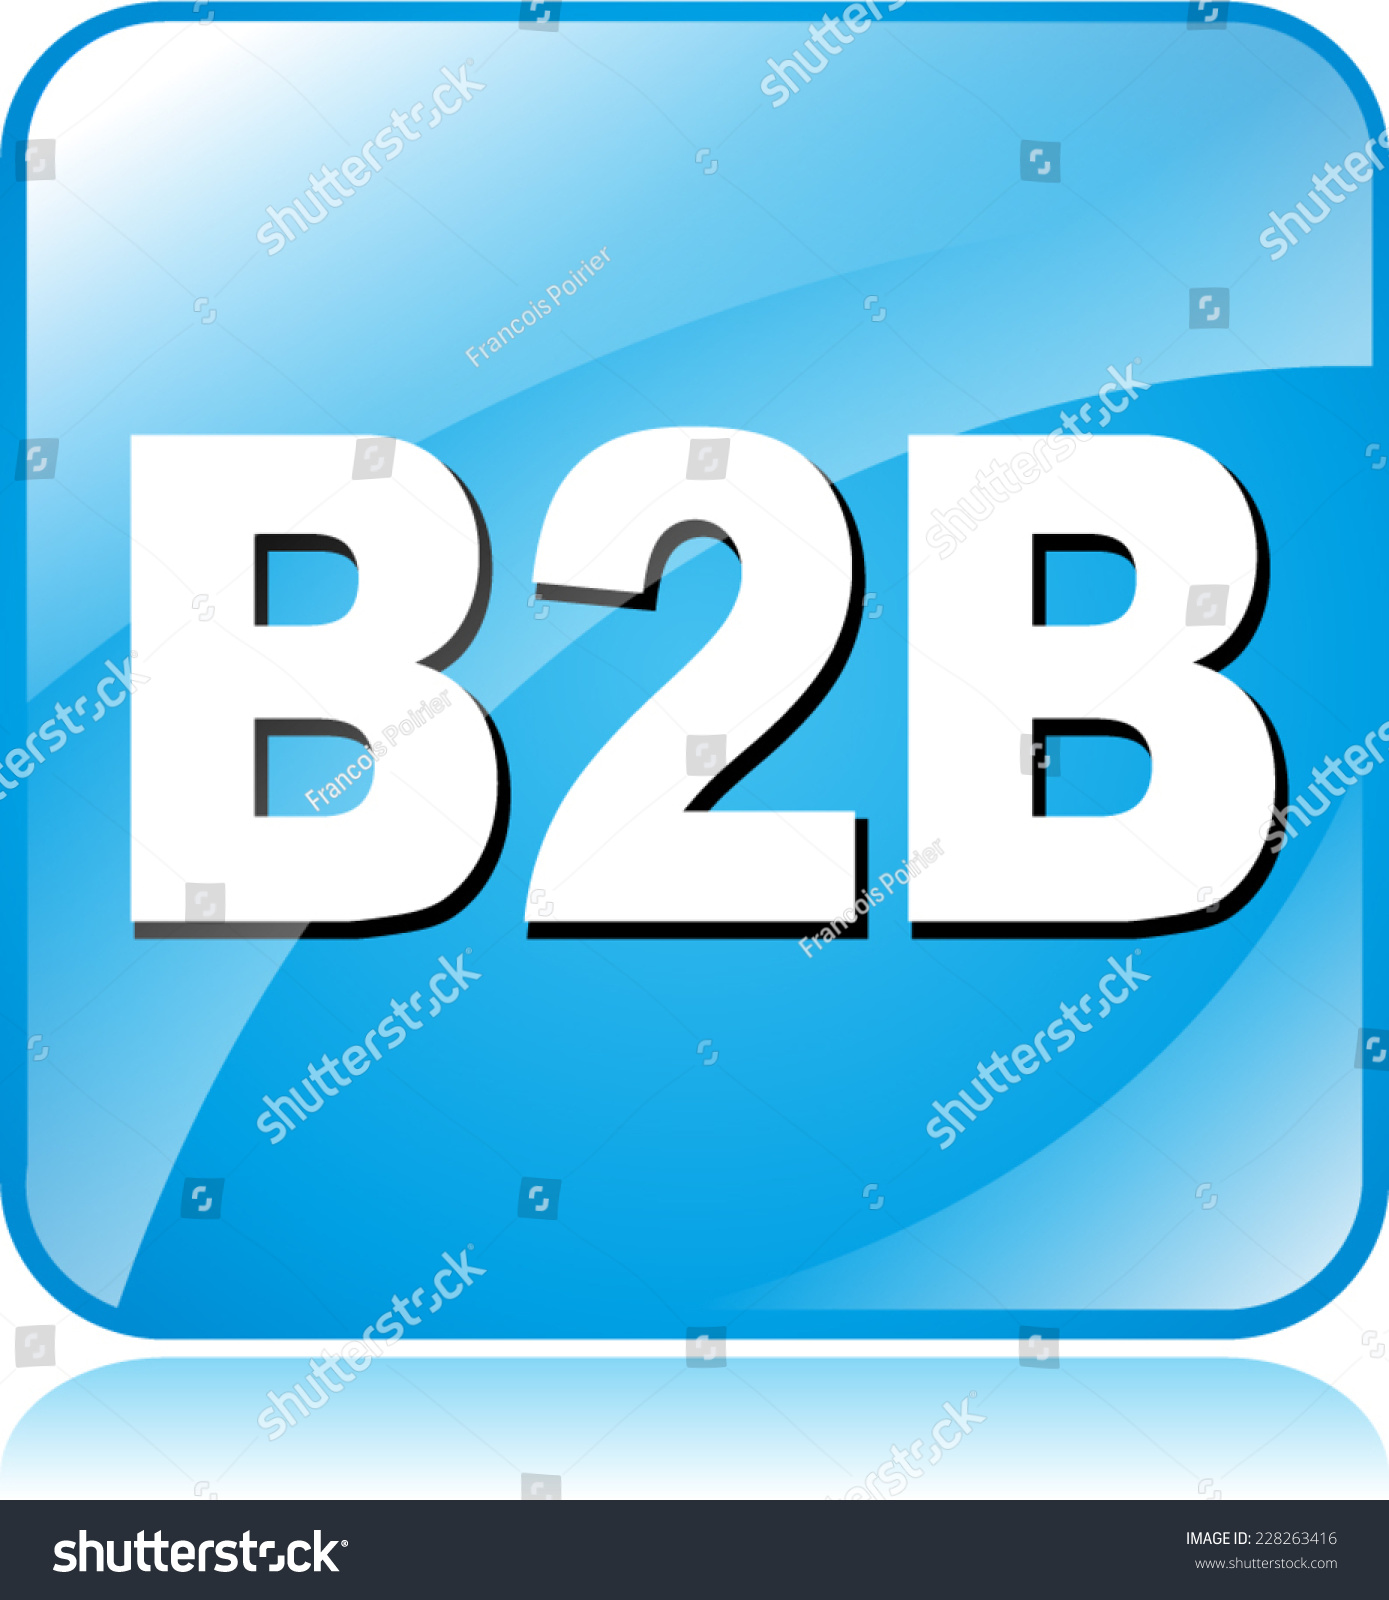 Illustration Blue Square Icon Business Business Stock Vector ...